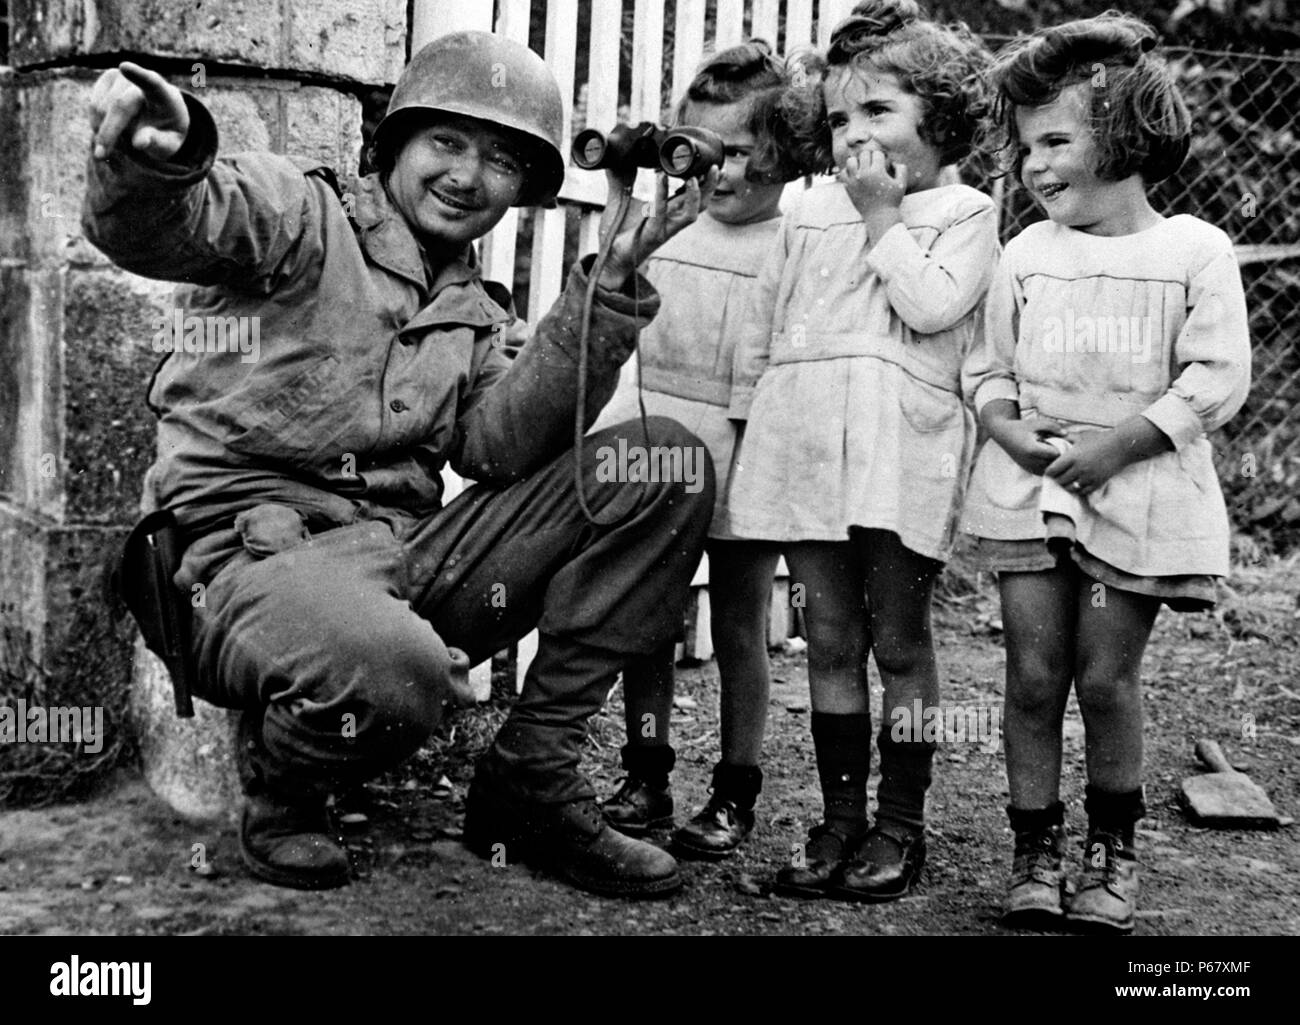 Image shows an American soldier holding binoculars up to three little girls so they're able to glance through the lens. After the liberation of Normandy, during World War 2 1944. Stock Photo